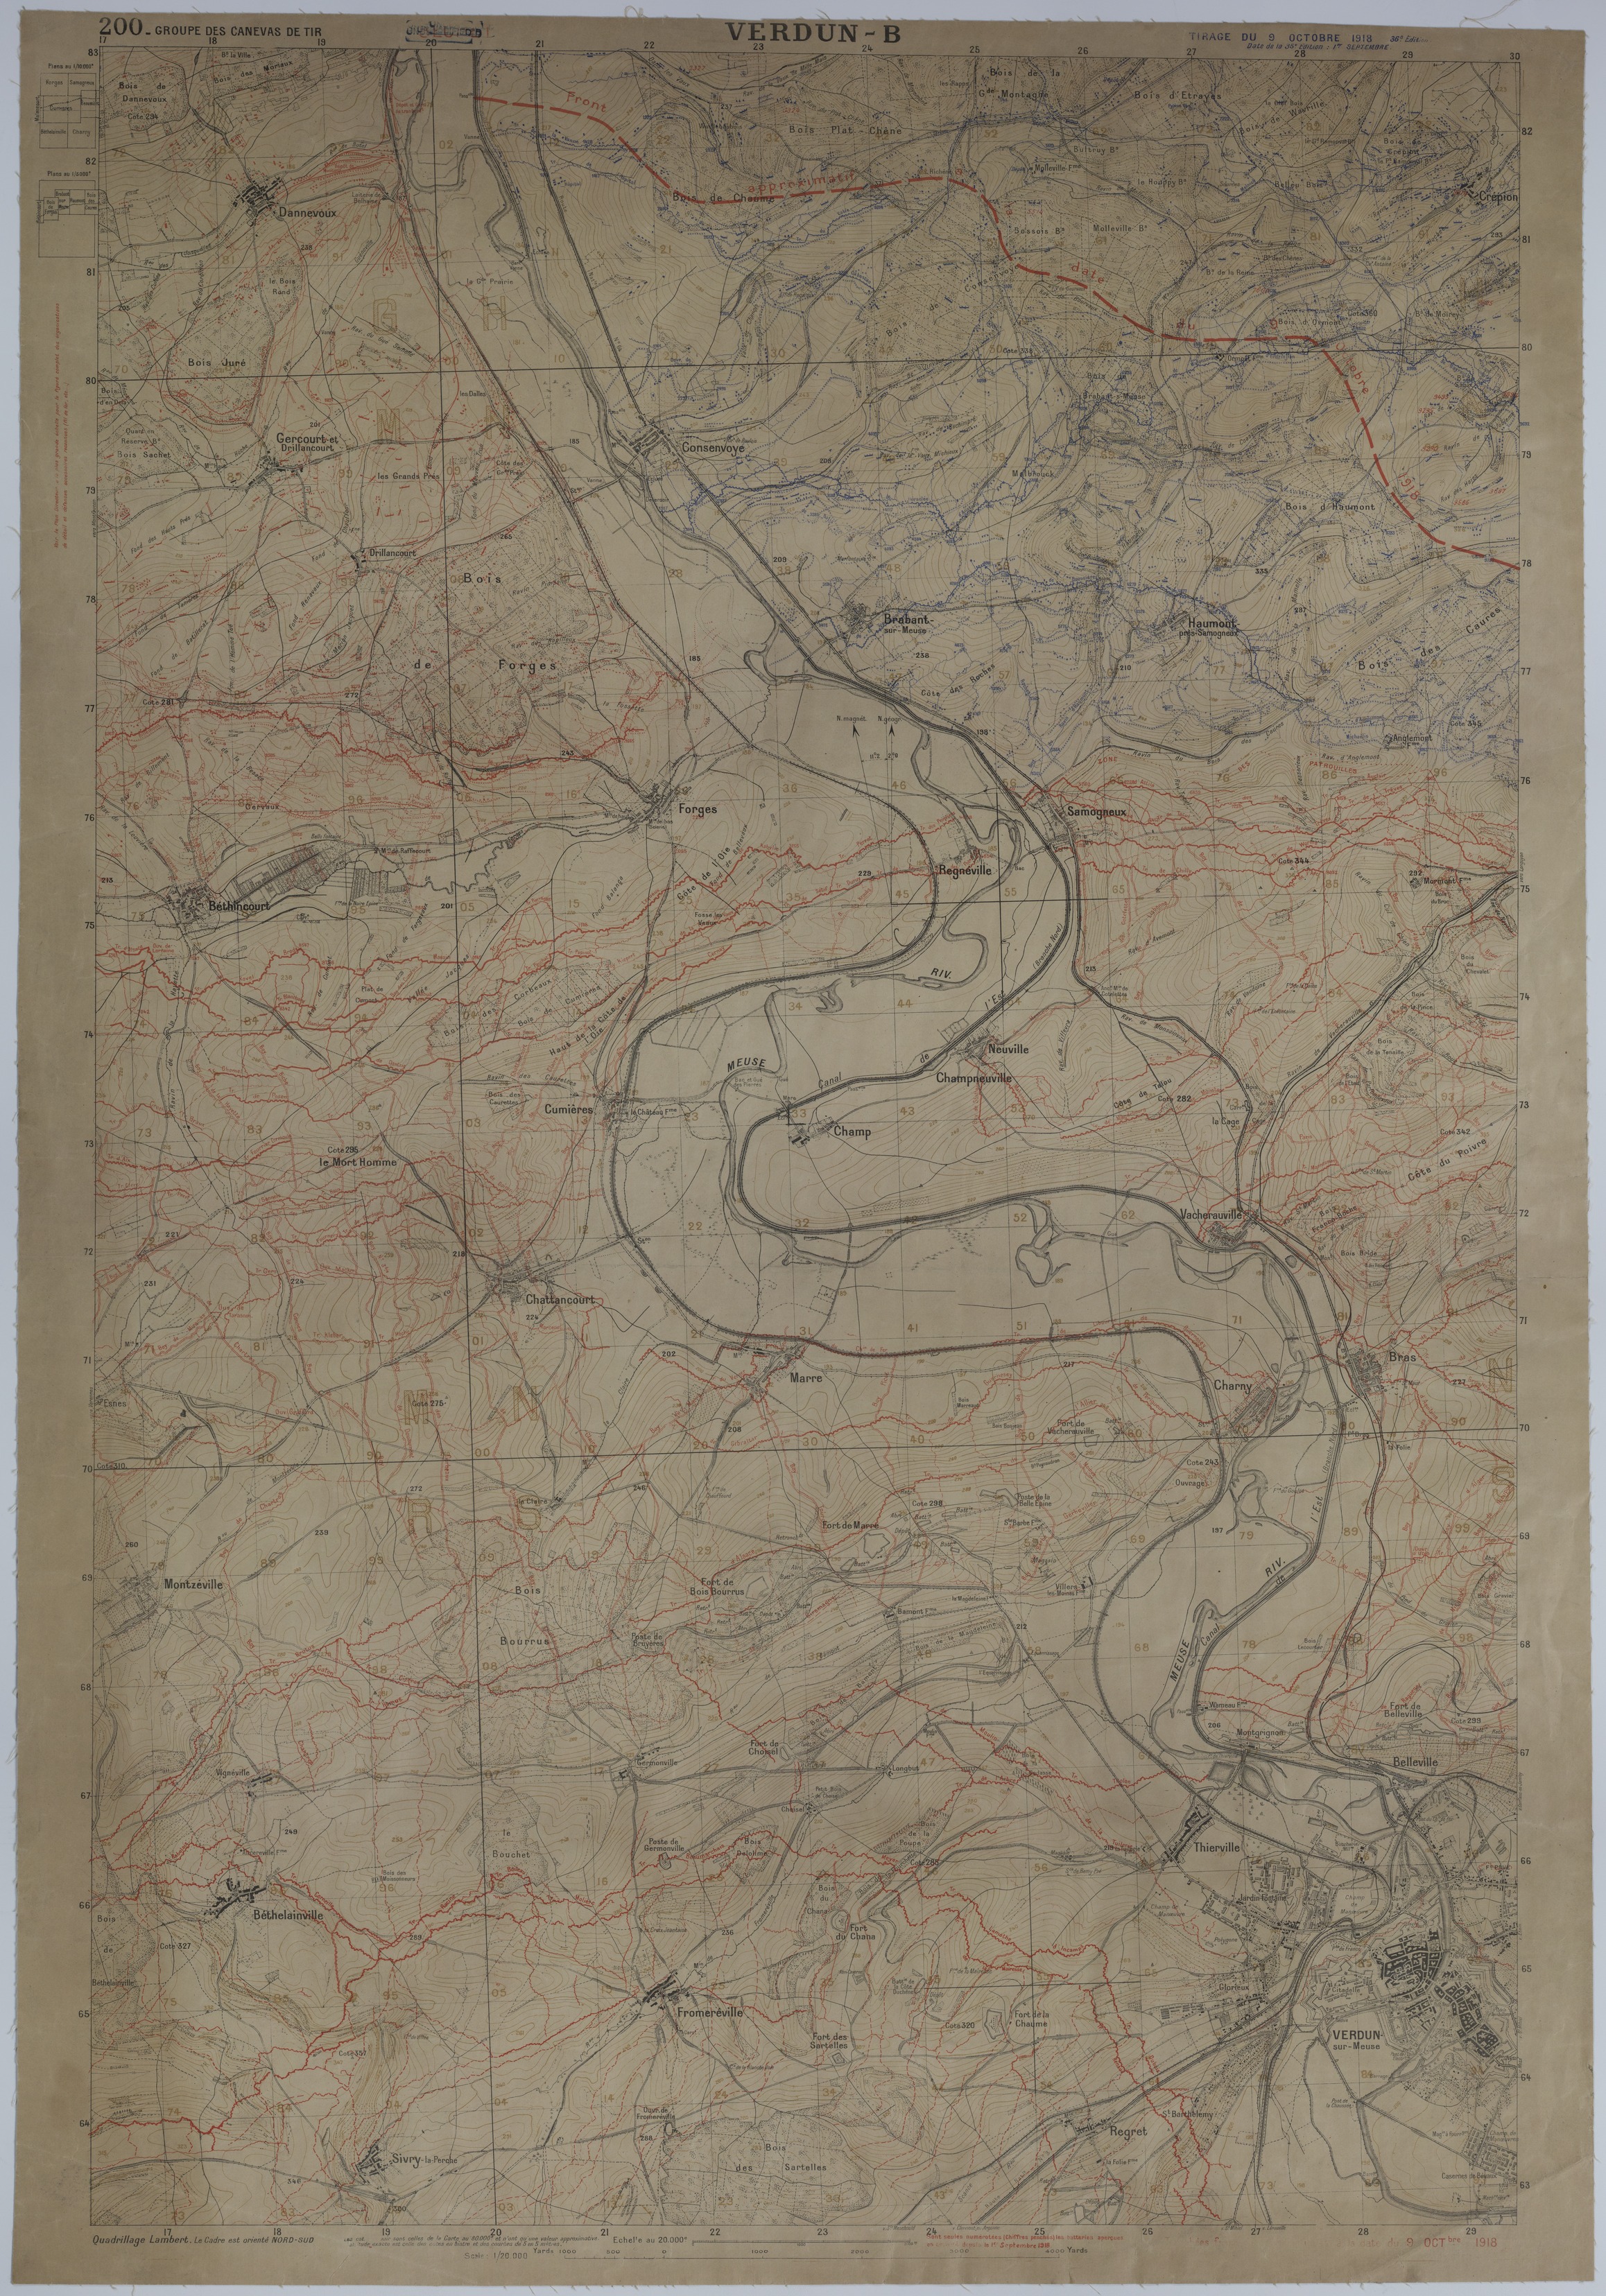 Map of Trench Systems and Battery Activity Along the Front